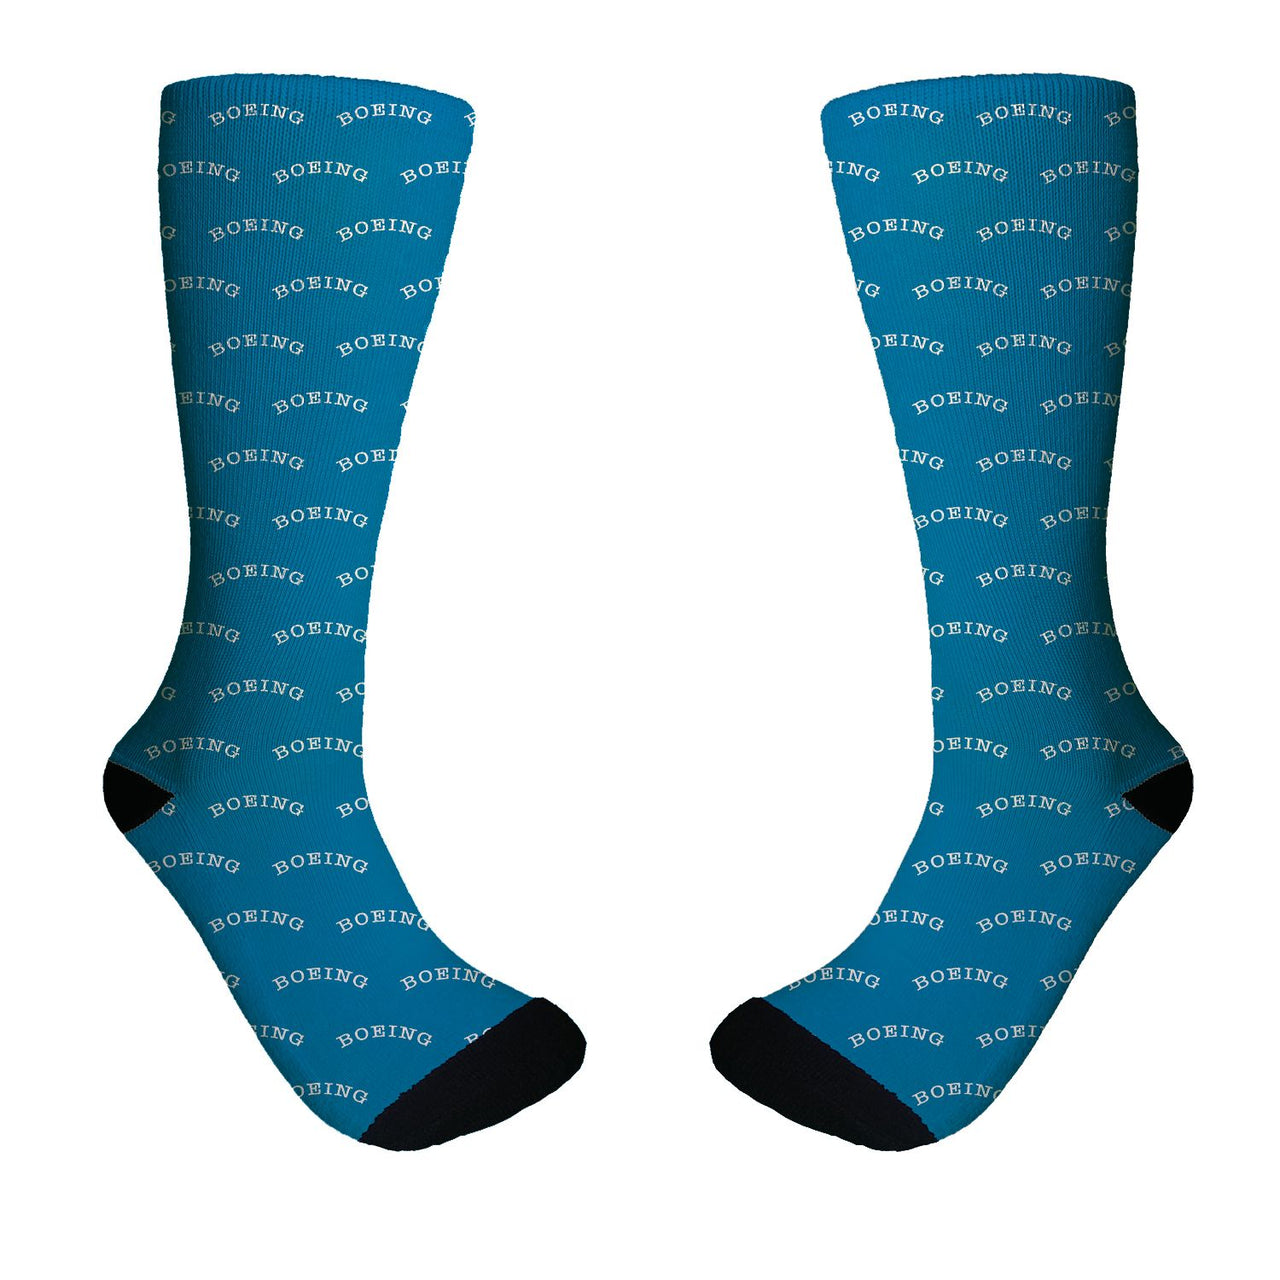 Special BOEING Text Designed Socks